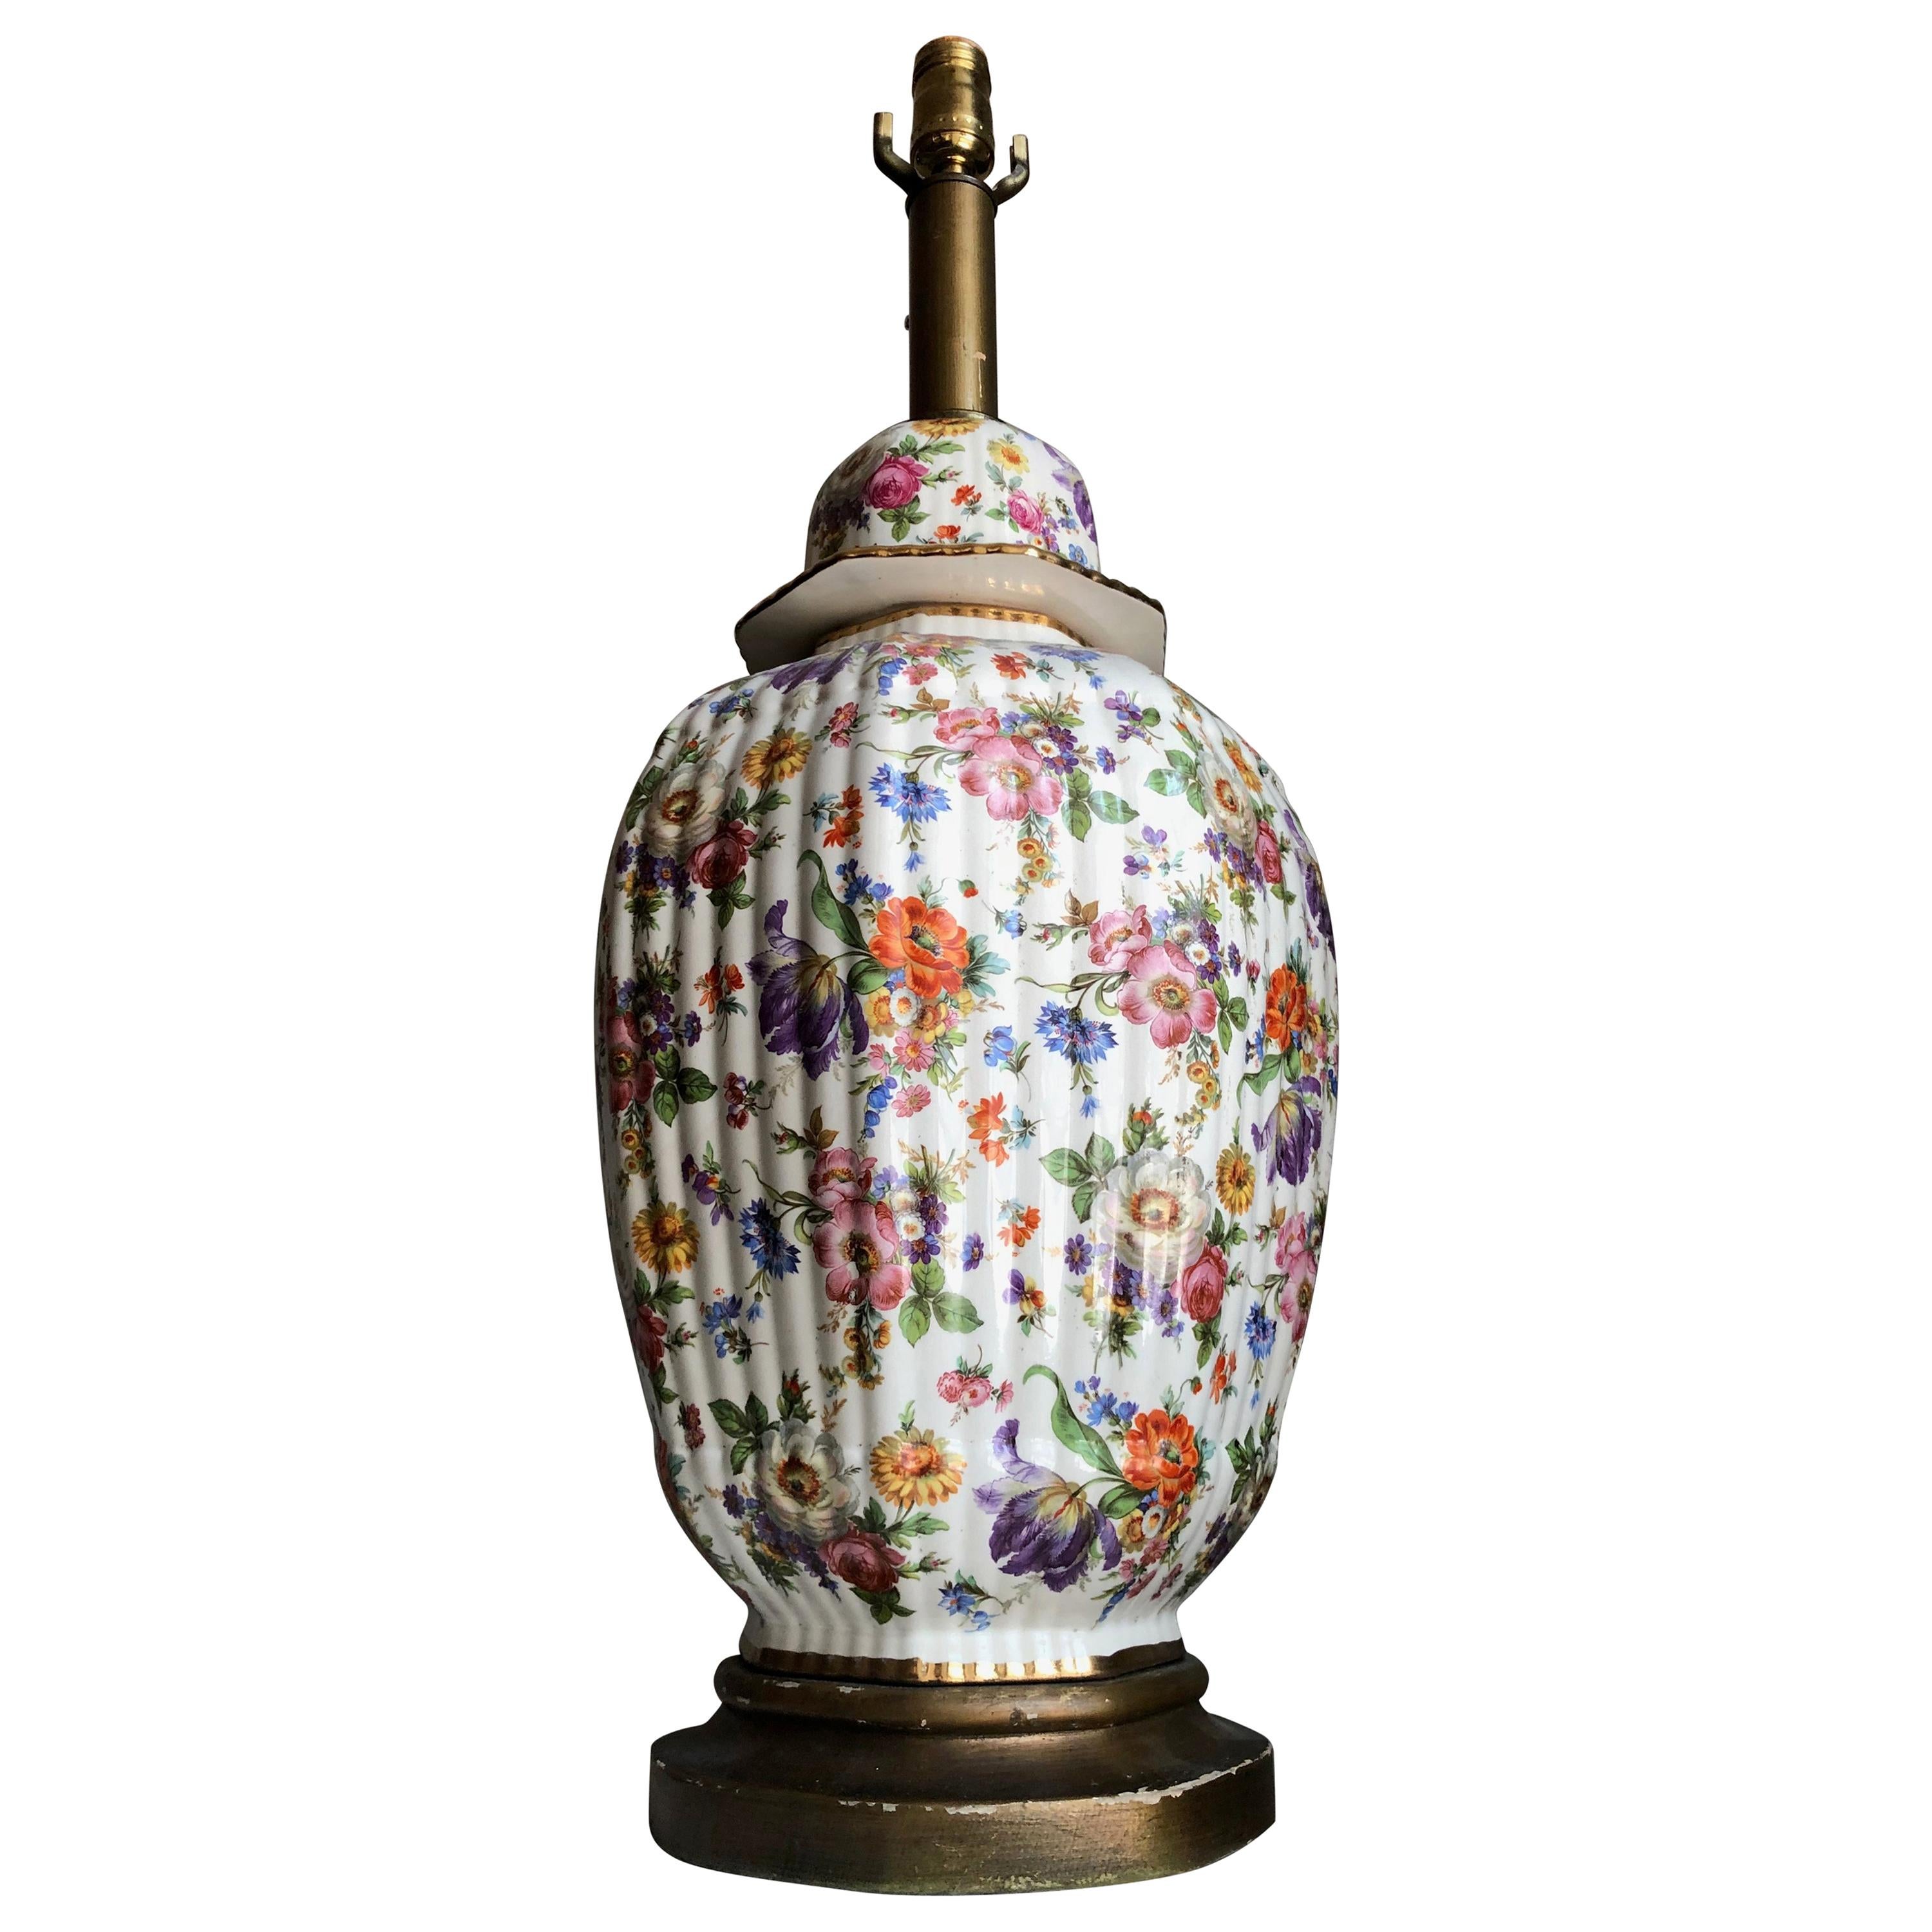 Boch Freres Chinoiserie Porcelain Gilt Floral Ginger Jar Hand Painted Table Lamp.  Gorgeous and monumental gilt hand painted floral porcelain chinoiserie ginger jar wired as lamp. Lovely scale and proportions. Genius use of color. Victorian